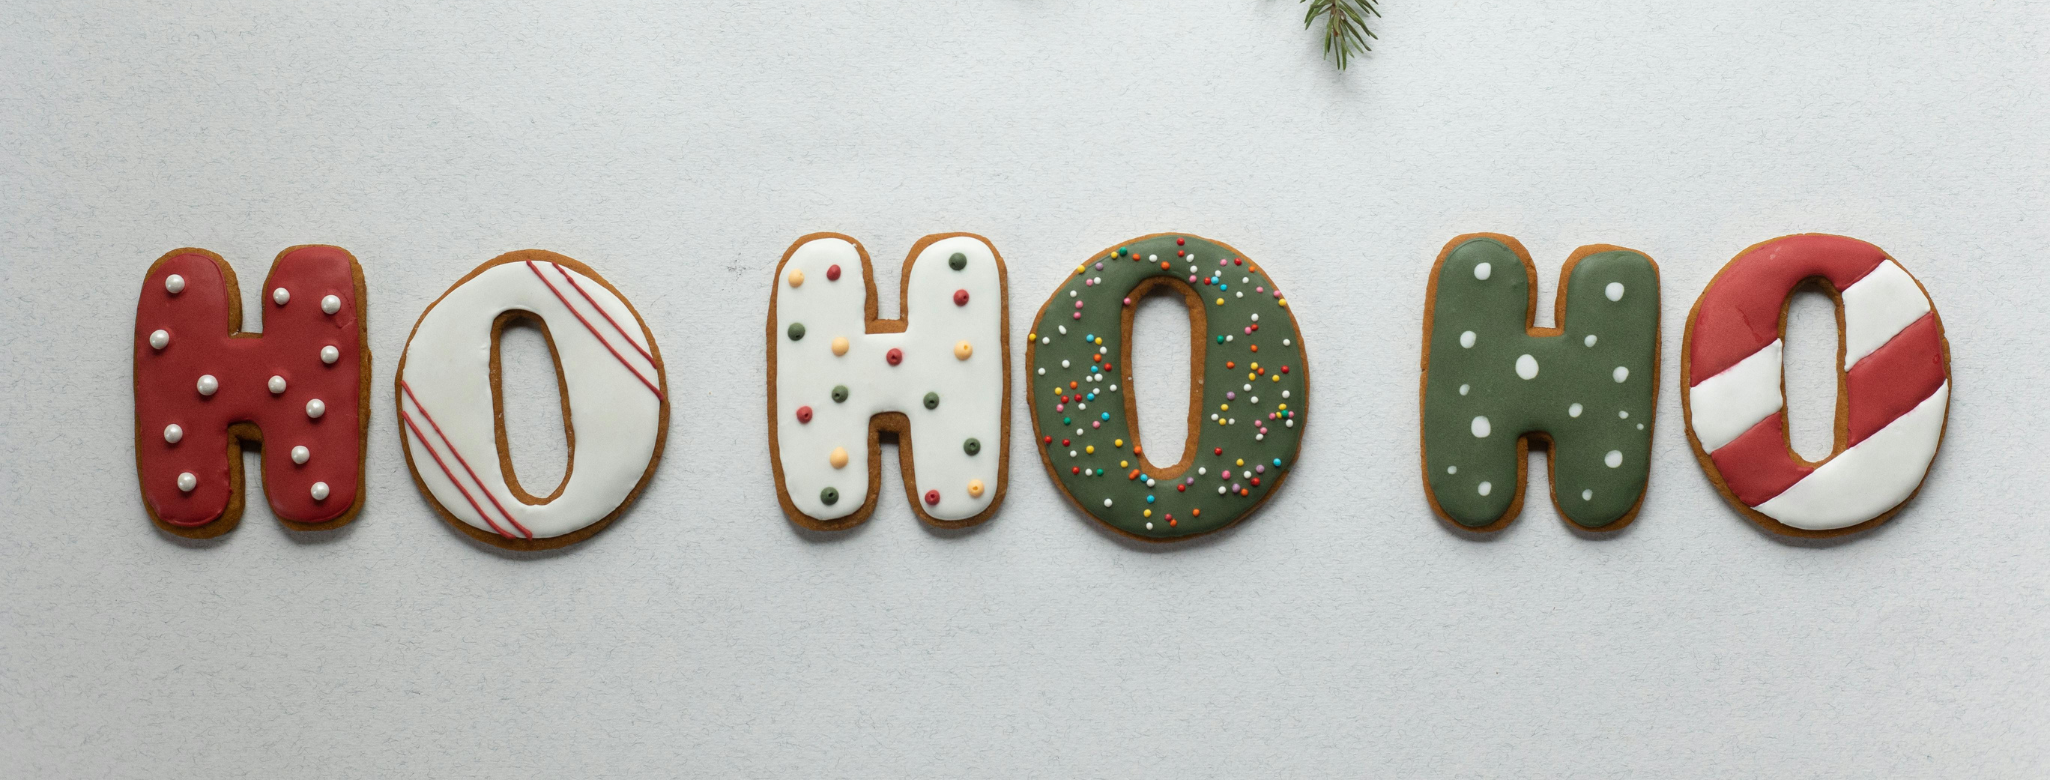 Navigating the holidays with celiac disease